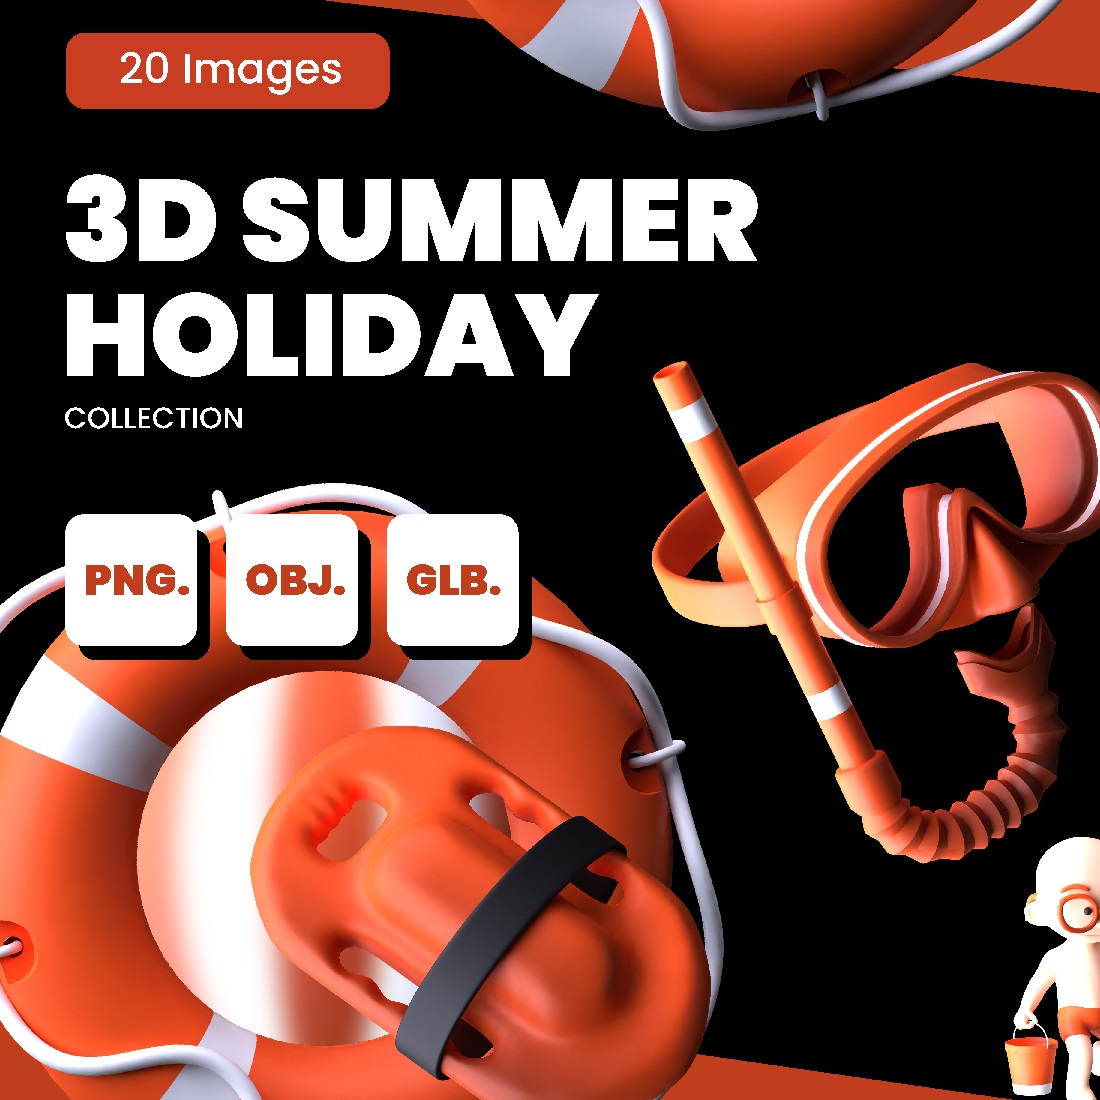 3d summer holiday preview image.